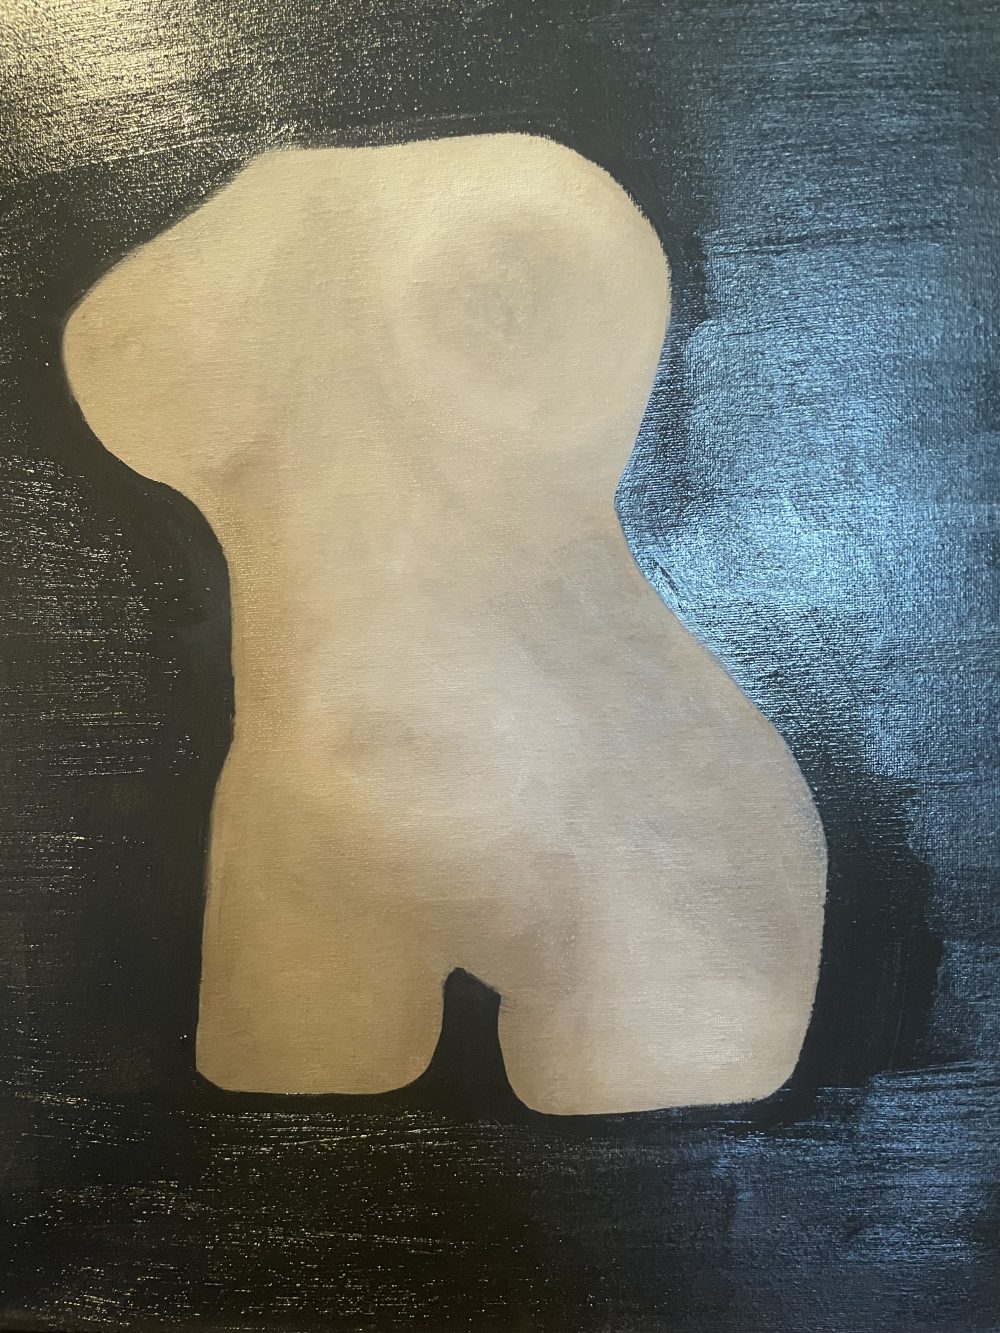 A painting or an armless, legless female statue, obscured by shadows.